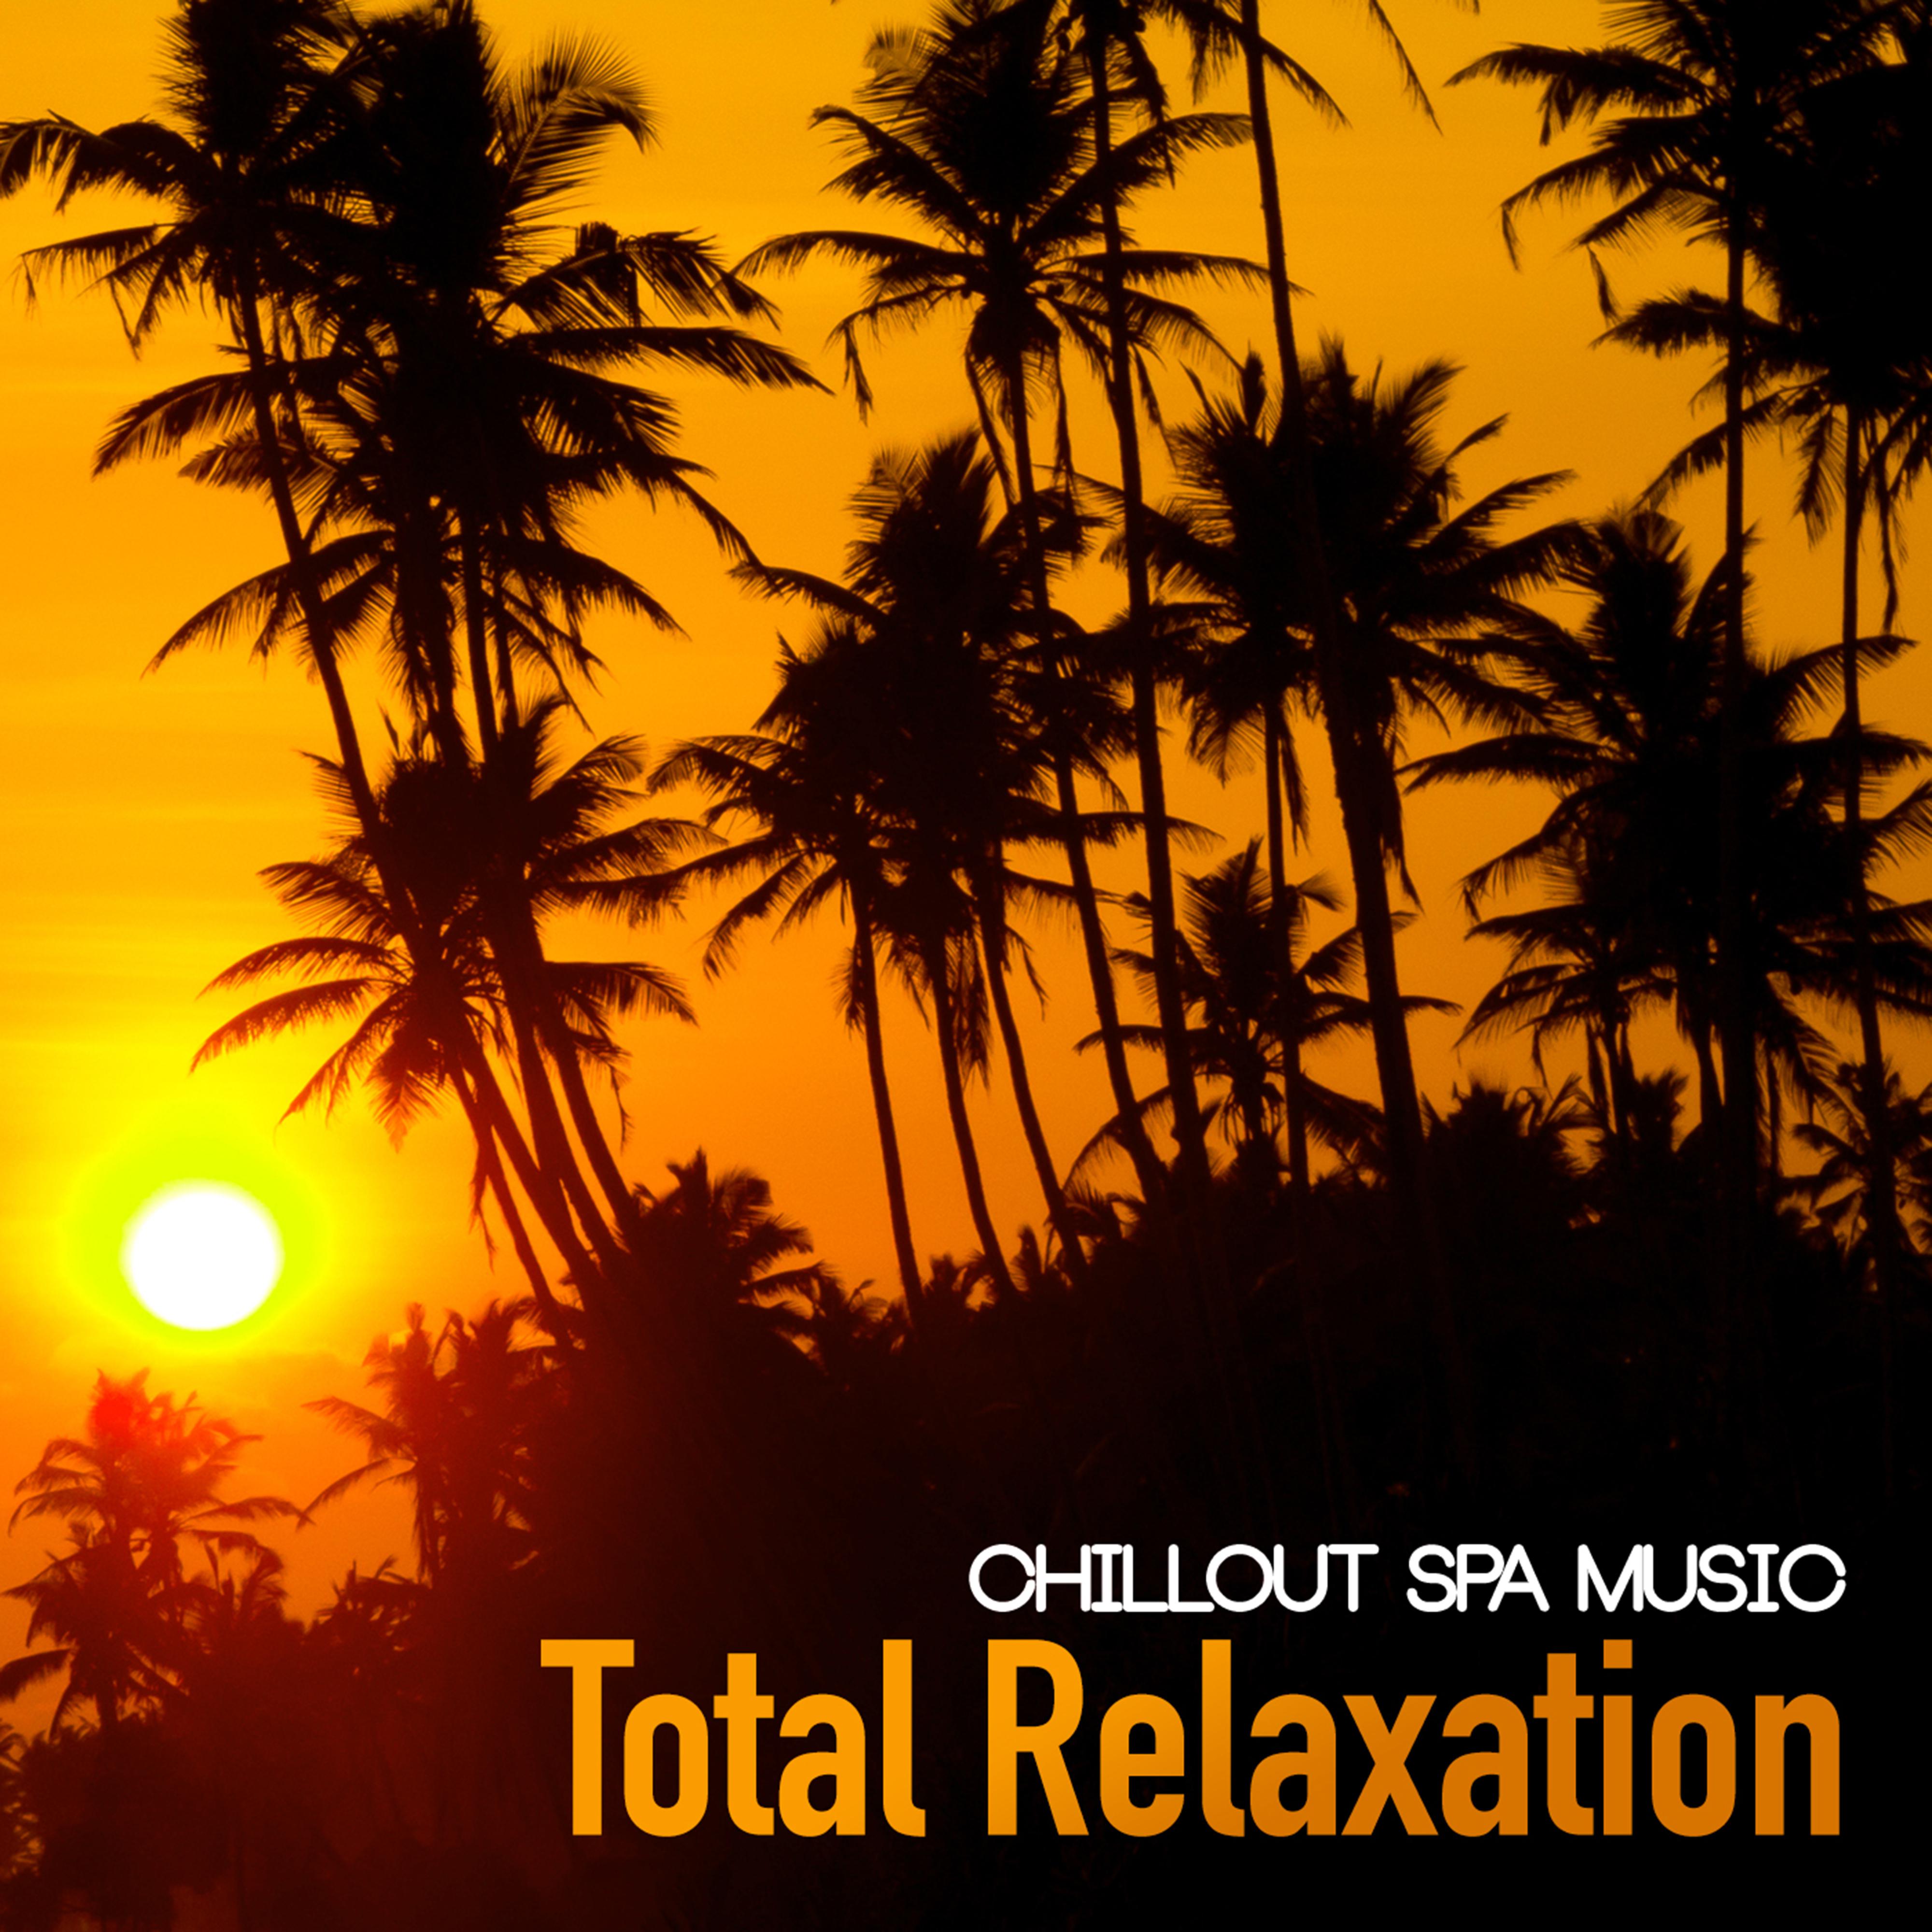 Chillout Spa Music